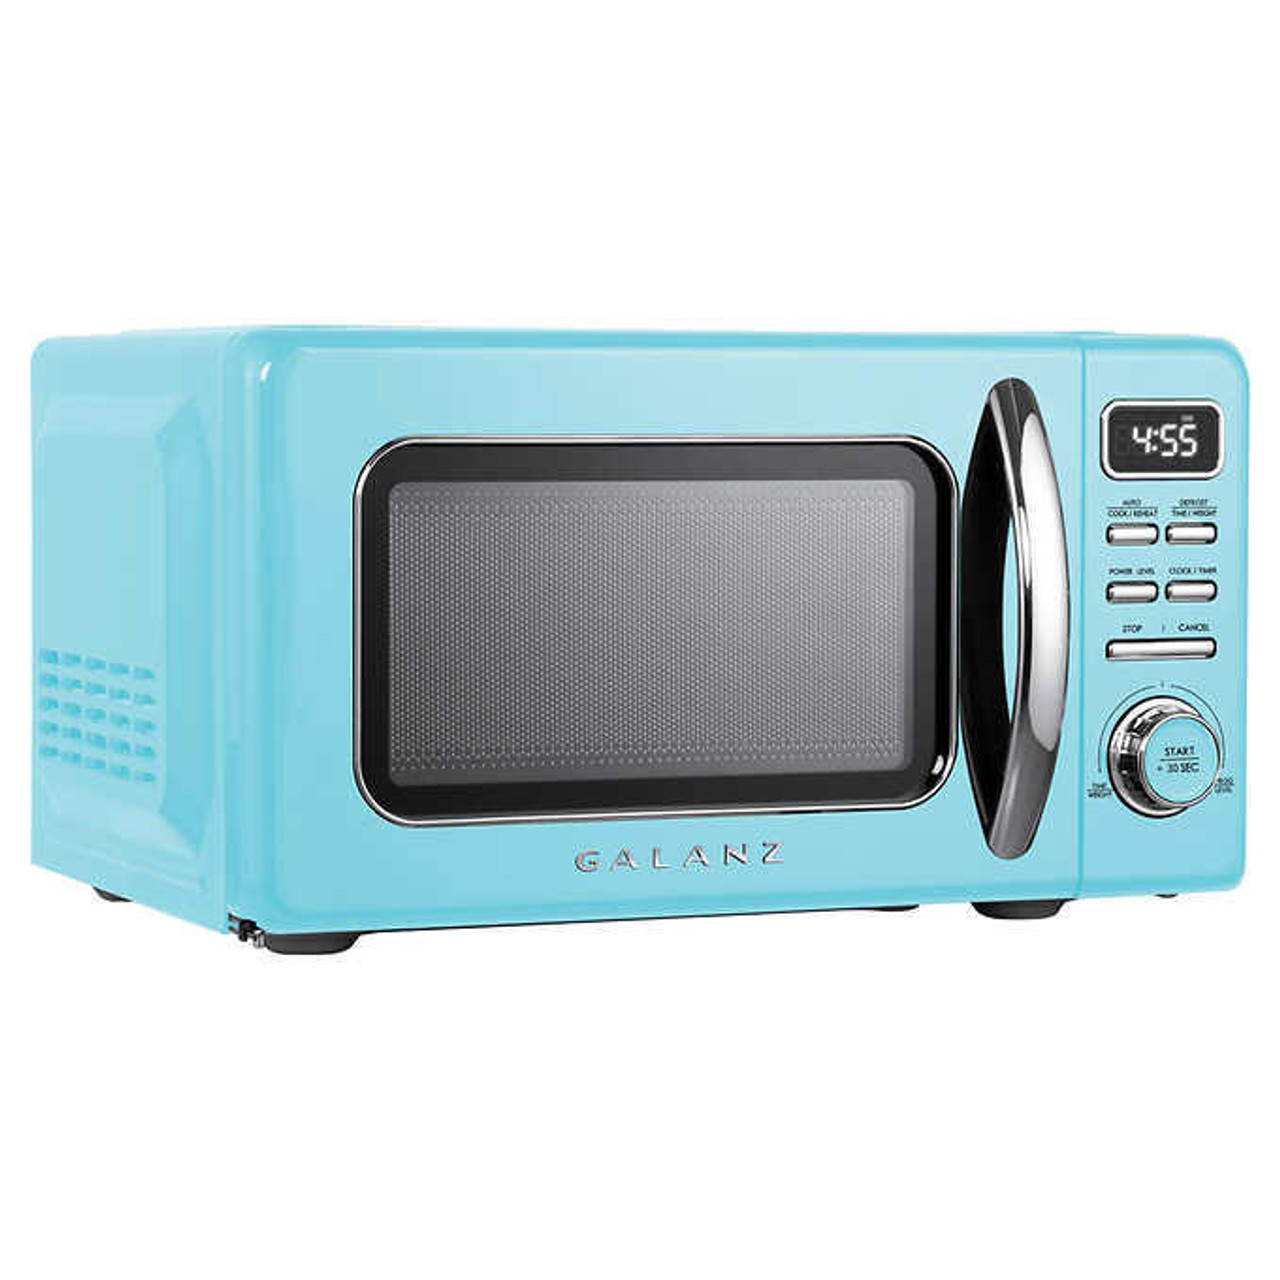 https://cdn11.bigcommerce.com/s-g5ygv2at8j/images/stencil/1280x1280/products/13638/31116/a2zchef-galanz-0.7-cu-ft-retro-microwave-oven__30746.1694511669.jpg?c=1